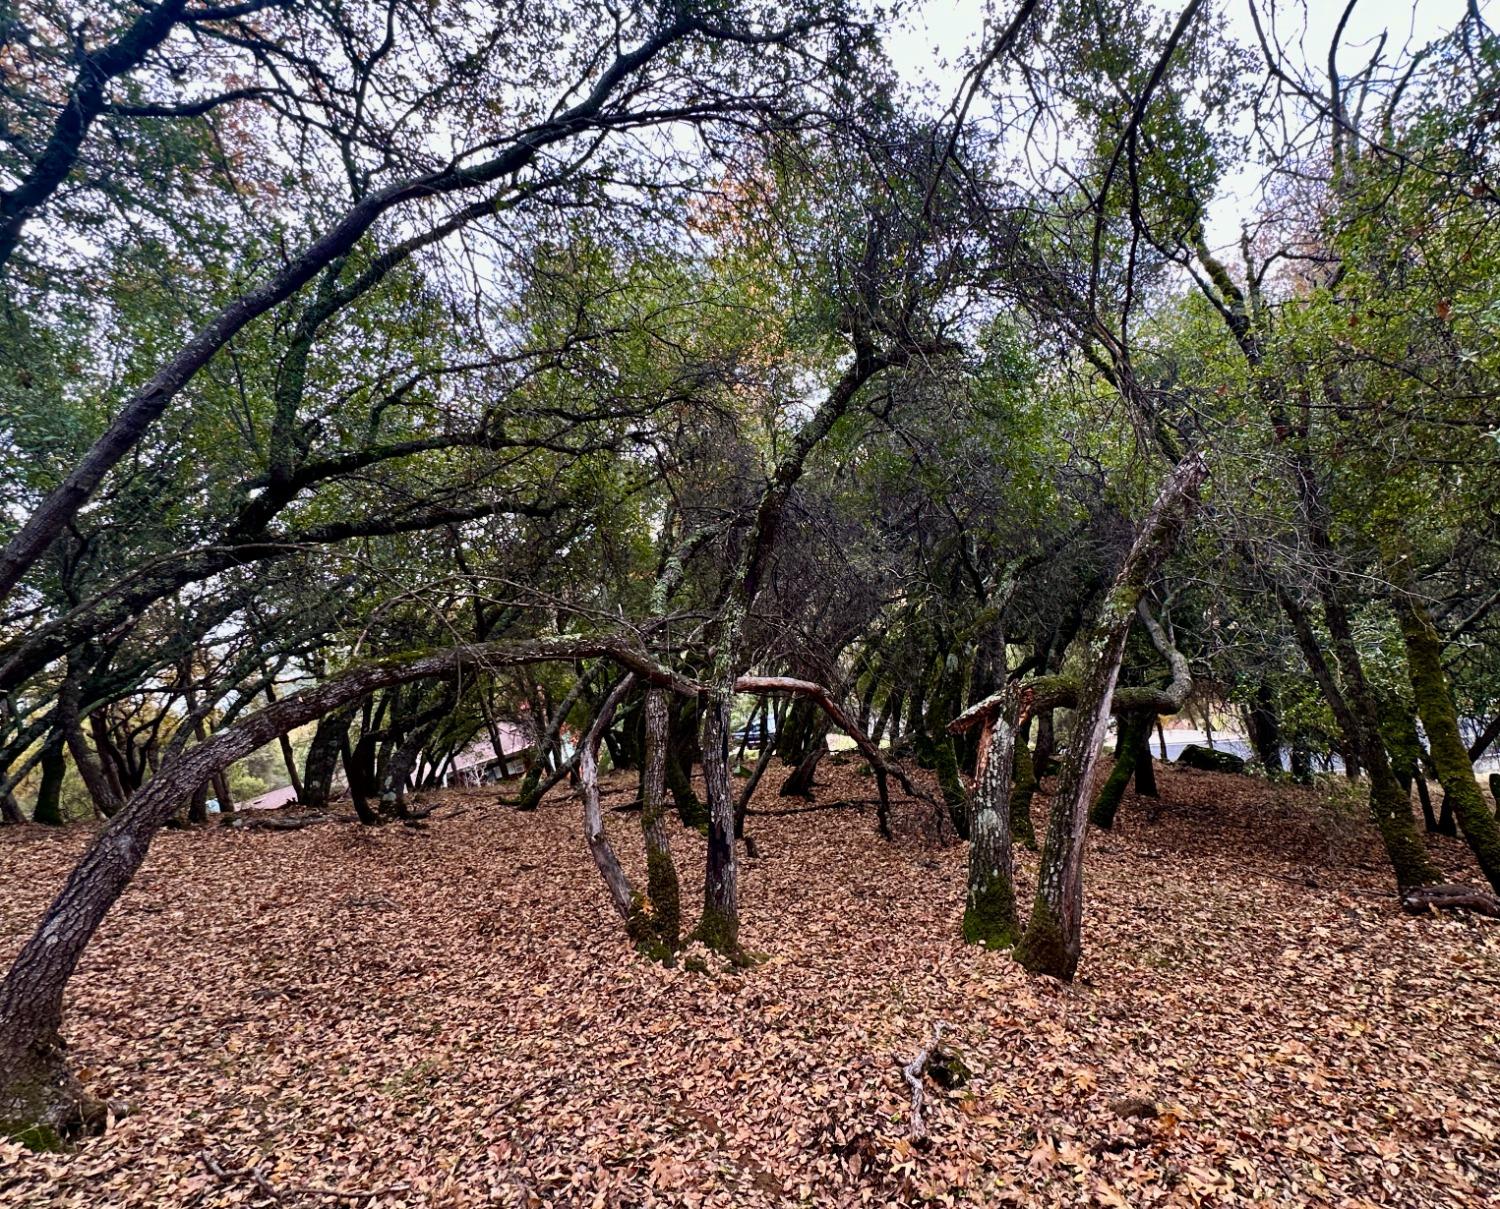 a view of some trees in the forest